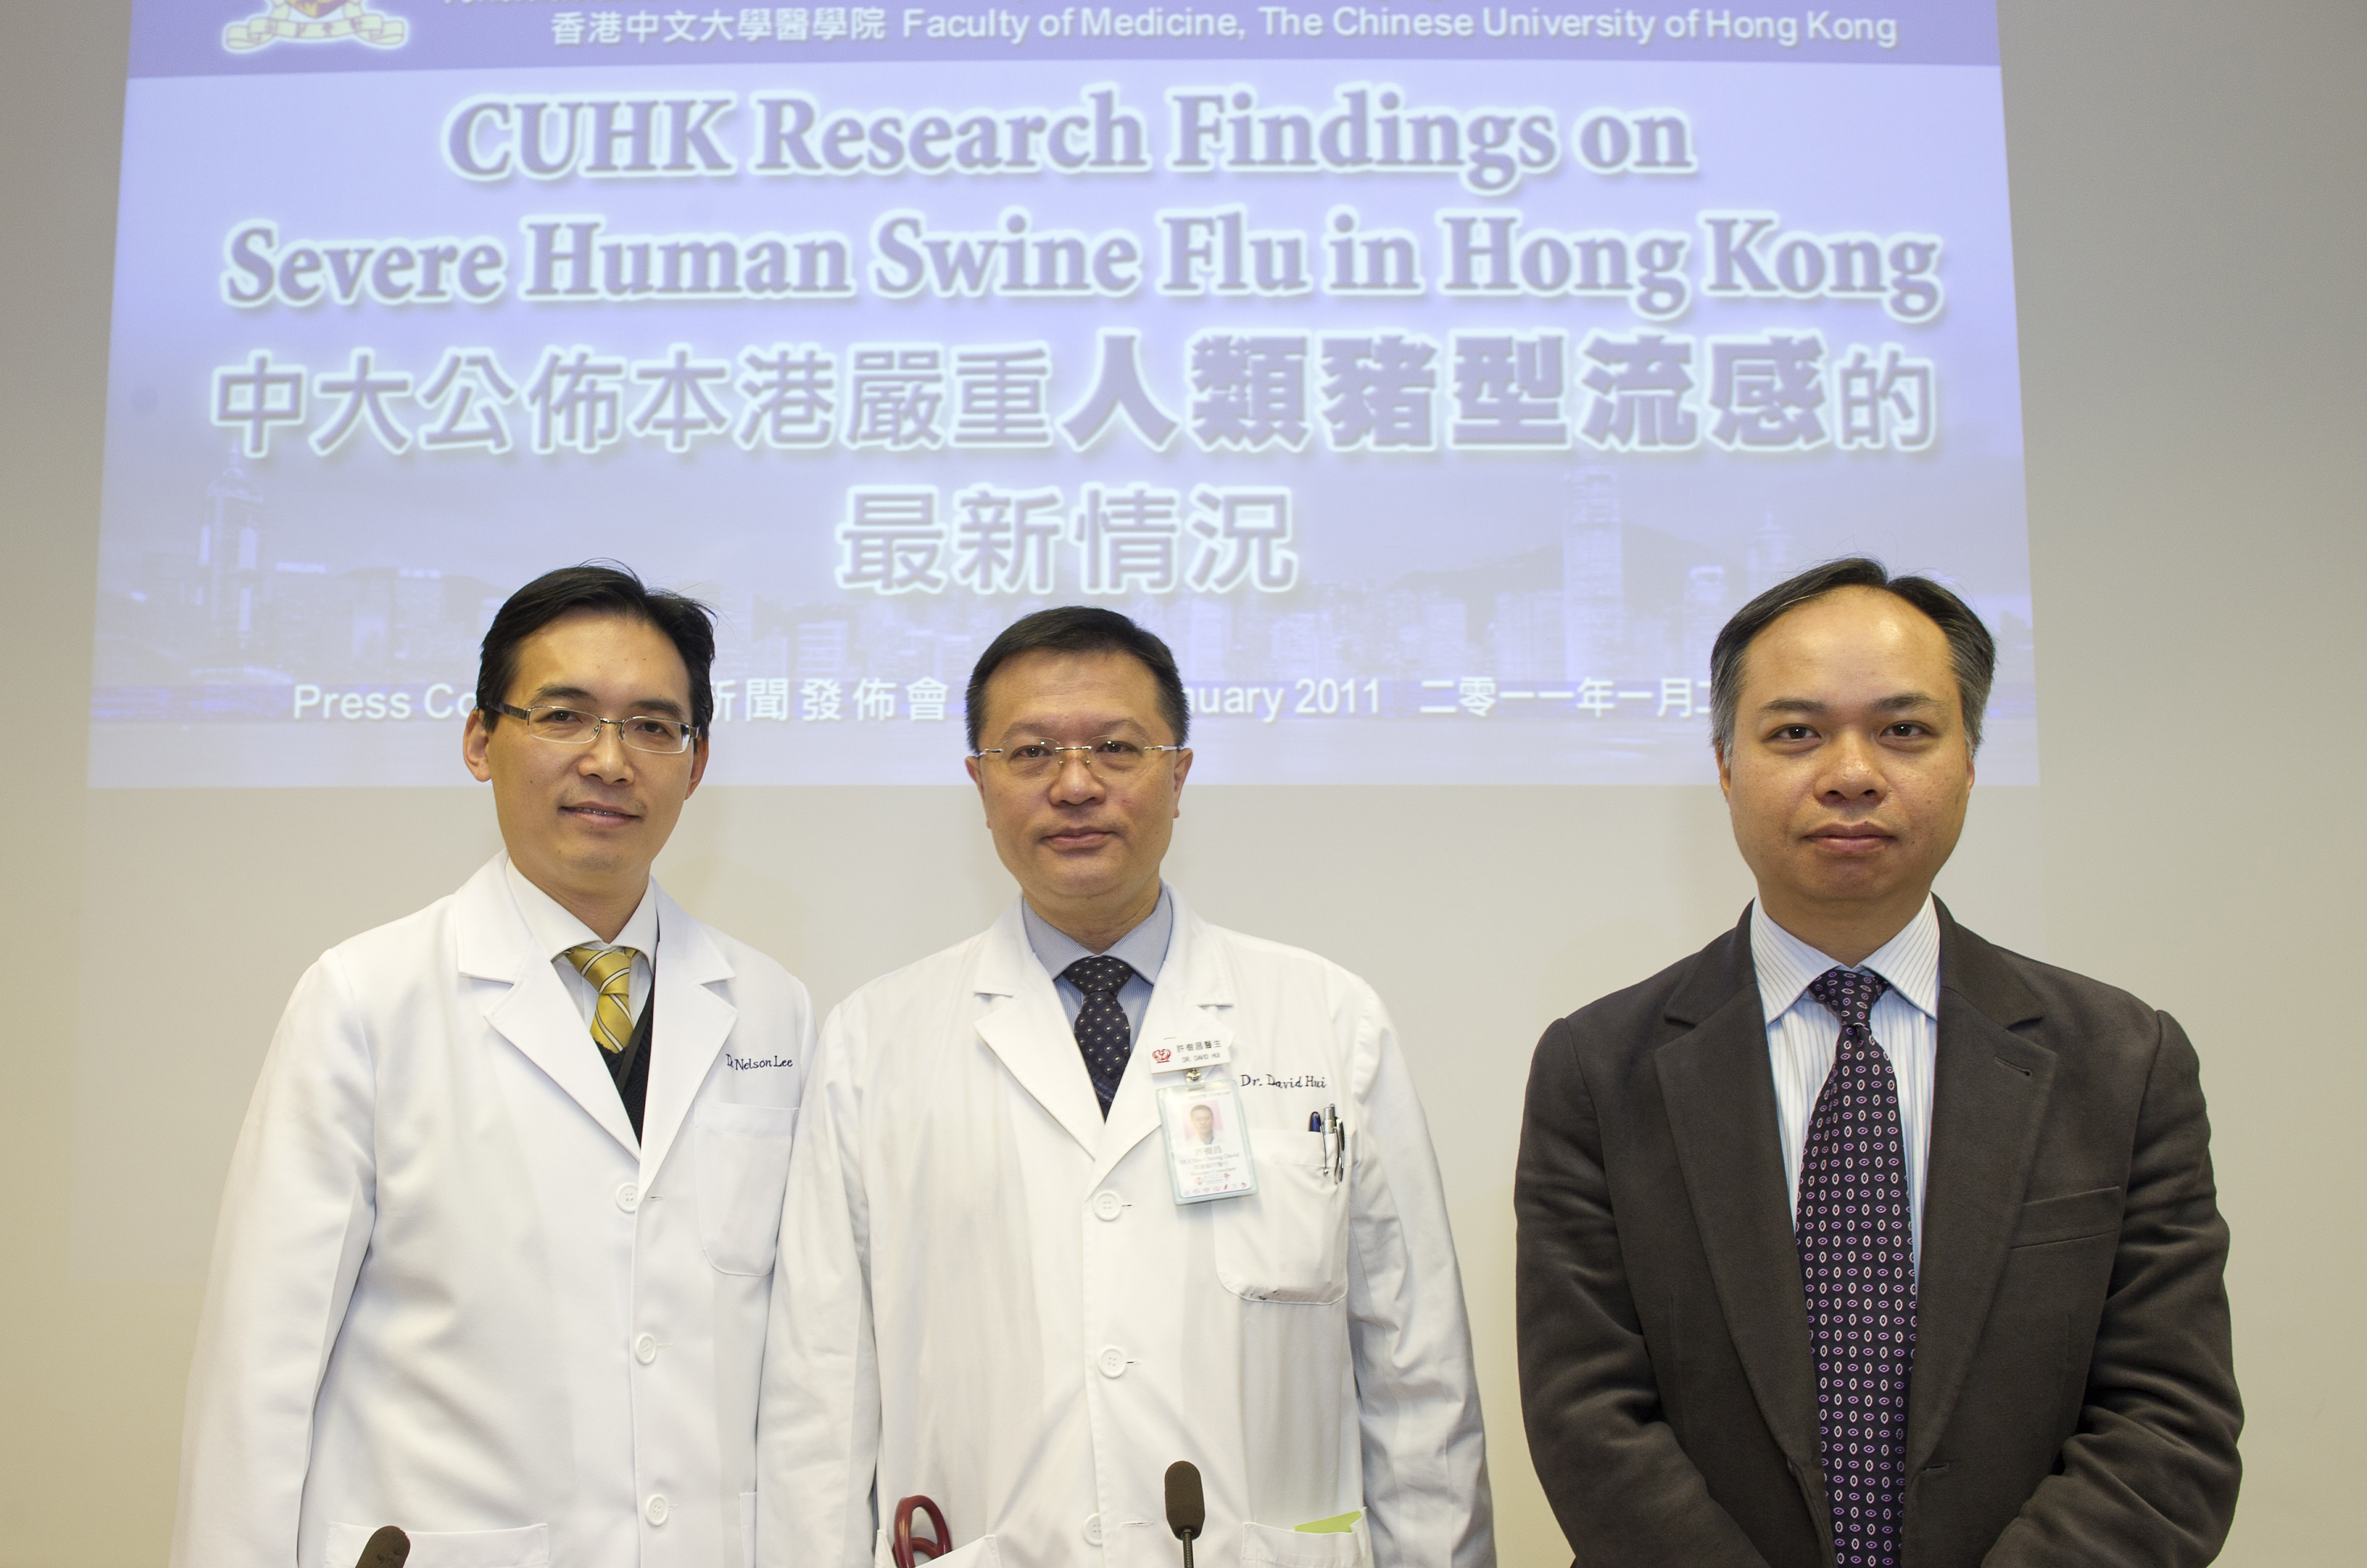 (from left) Professor Nelson Lai Shun LEE, Head of Division of Infectious Diseases, Department of Medicine & Therapeutics, CUHK; Professor David Shu Cheong HUI, Head of Division of Respiratory Medicine, Department of Medicine & Therapeutics, CUHK and Professor Paul Kay Sheung CHAN, Professor, Department of Microbiology, CUHK